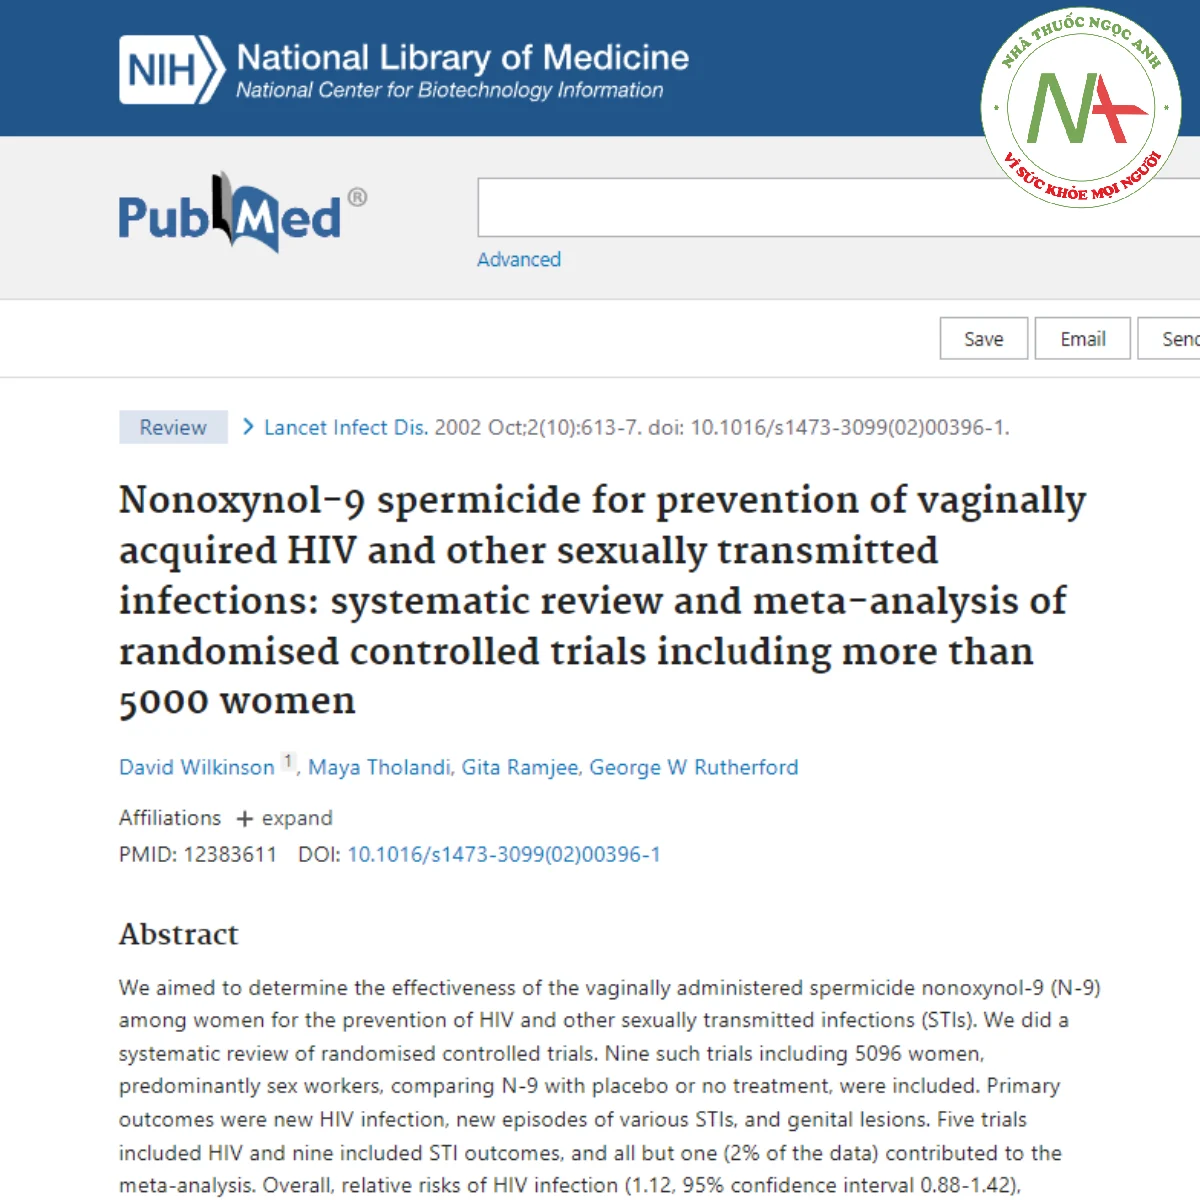 Nonoxynol-9 spermicide for prevention of vaginally acquired HIV and other sexually transmitted infections: systematic review and meta-analysis of randomised controlled trials including more than 5000 women